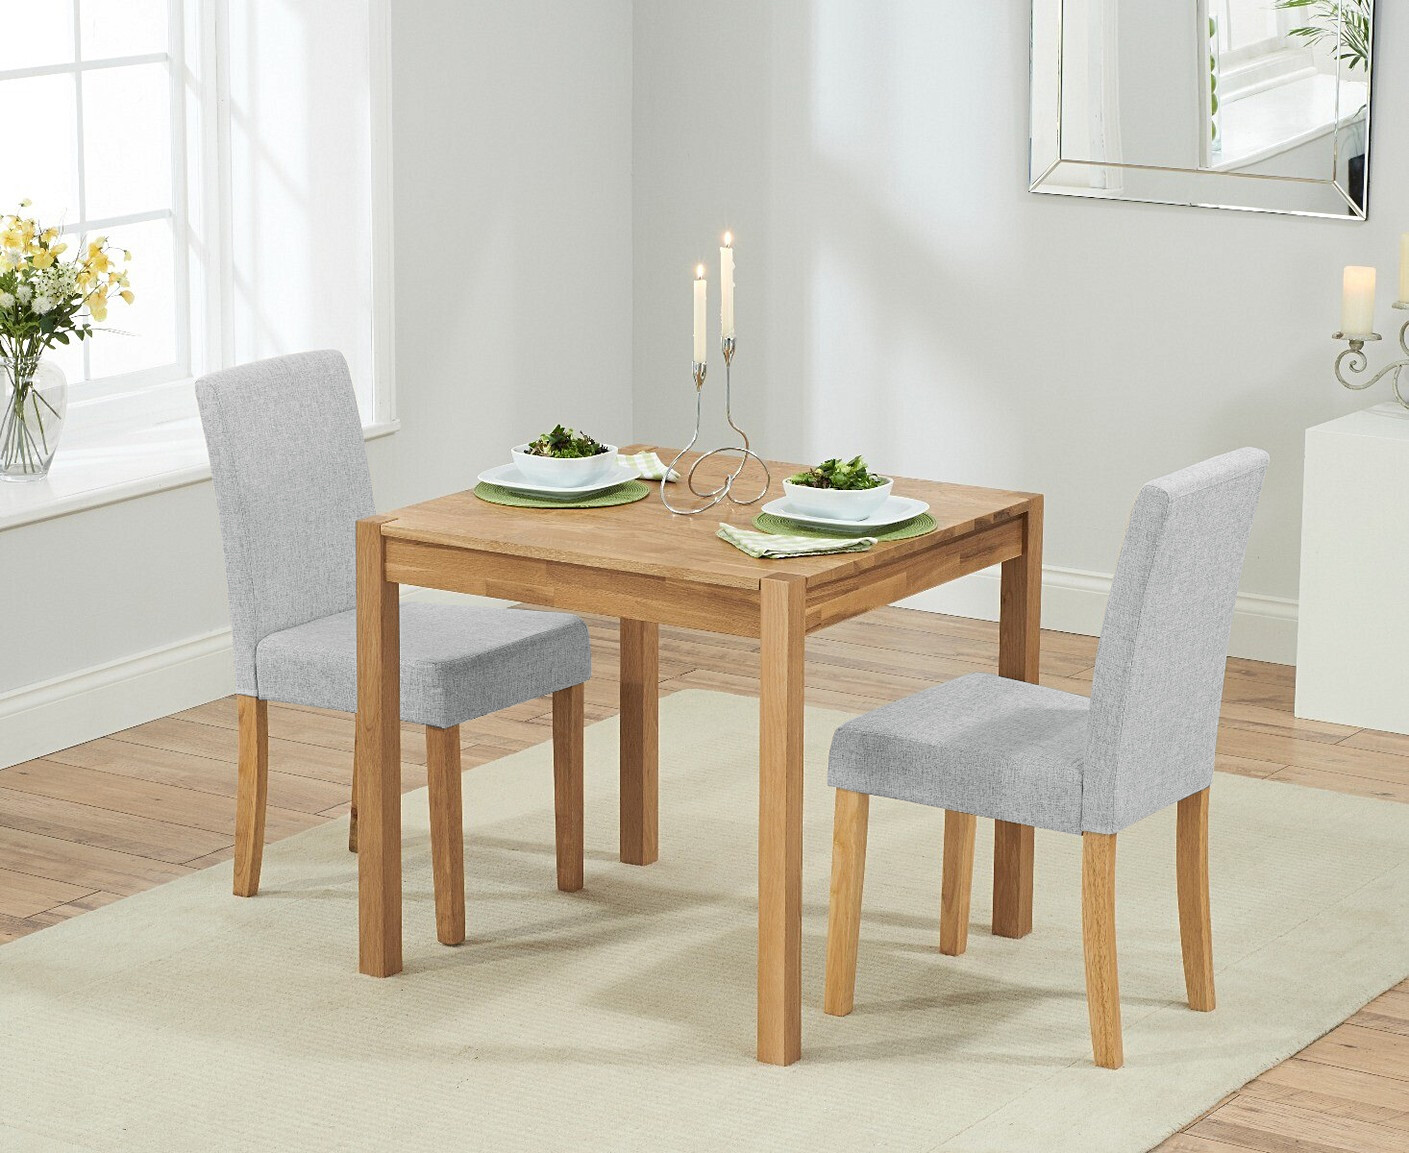 Photo 3 of York 80cm solid oak dining table with 2 charcoal lila chairs